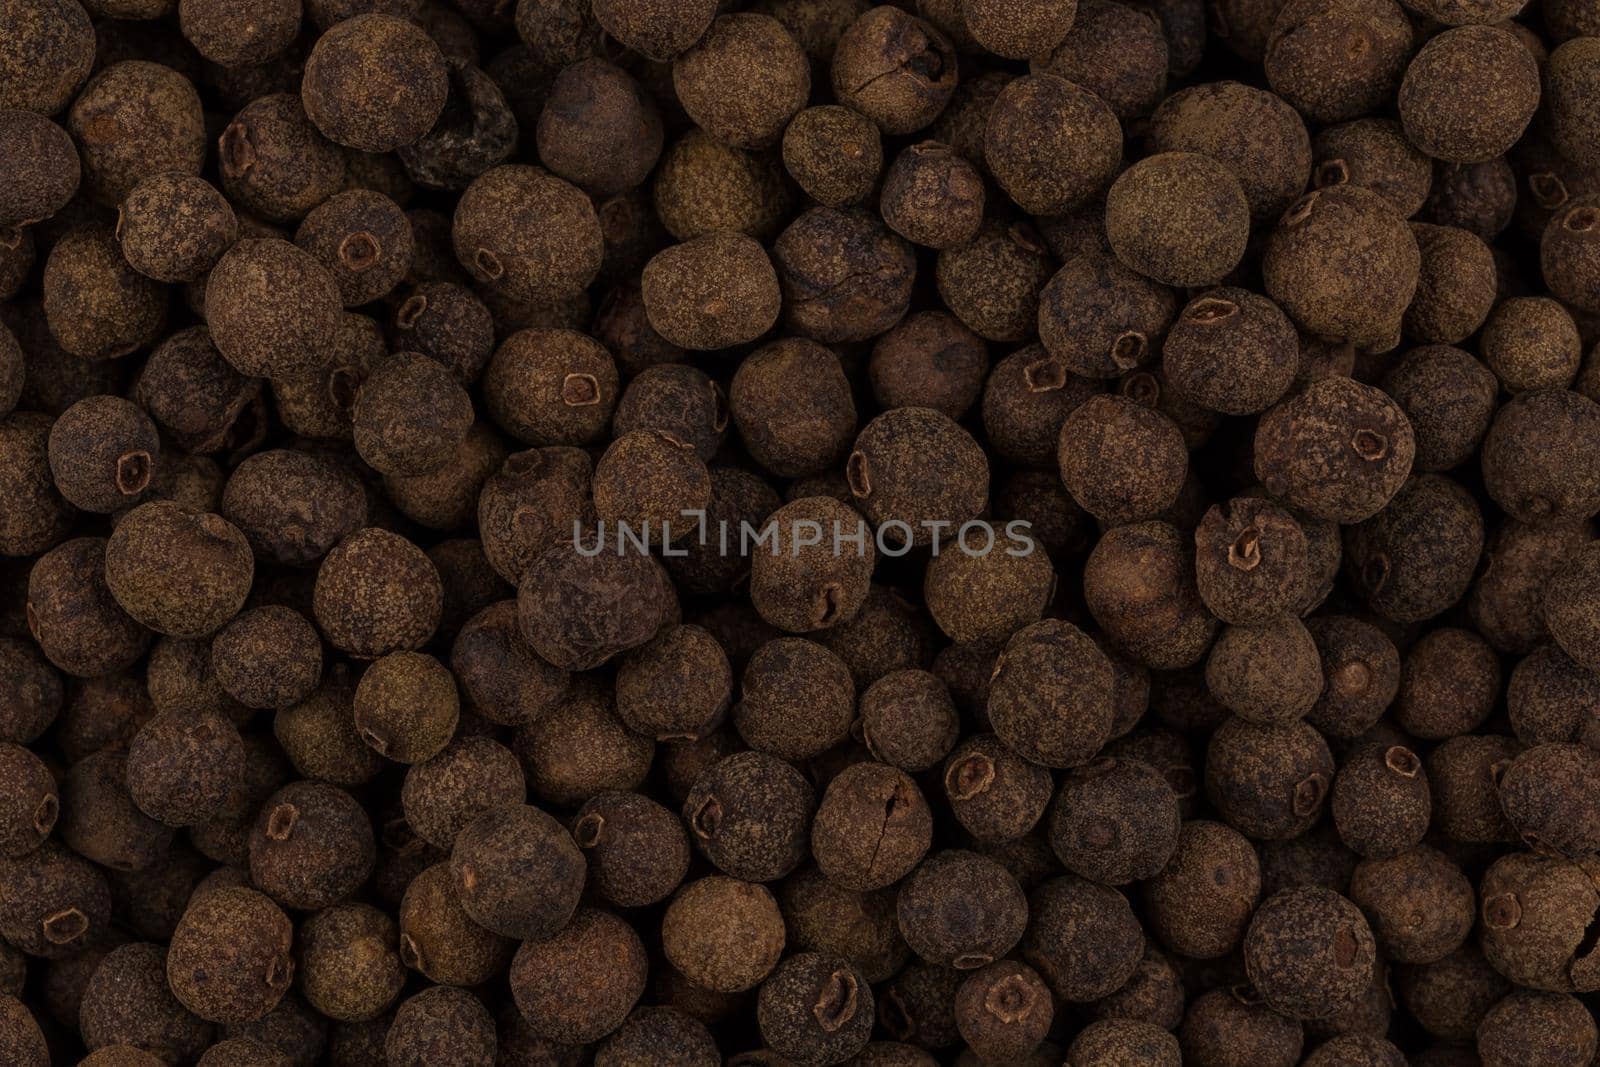 Large black pepper seeds corns as a background